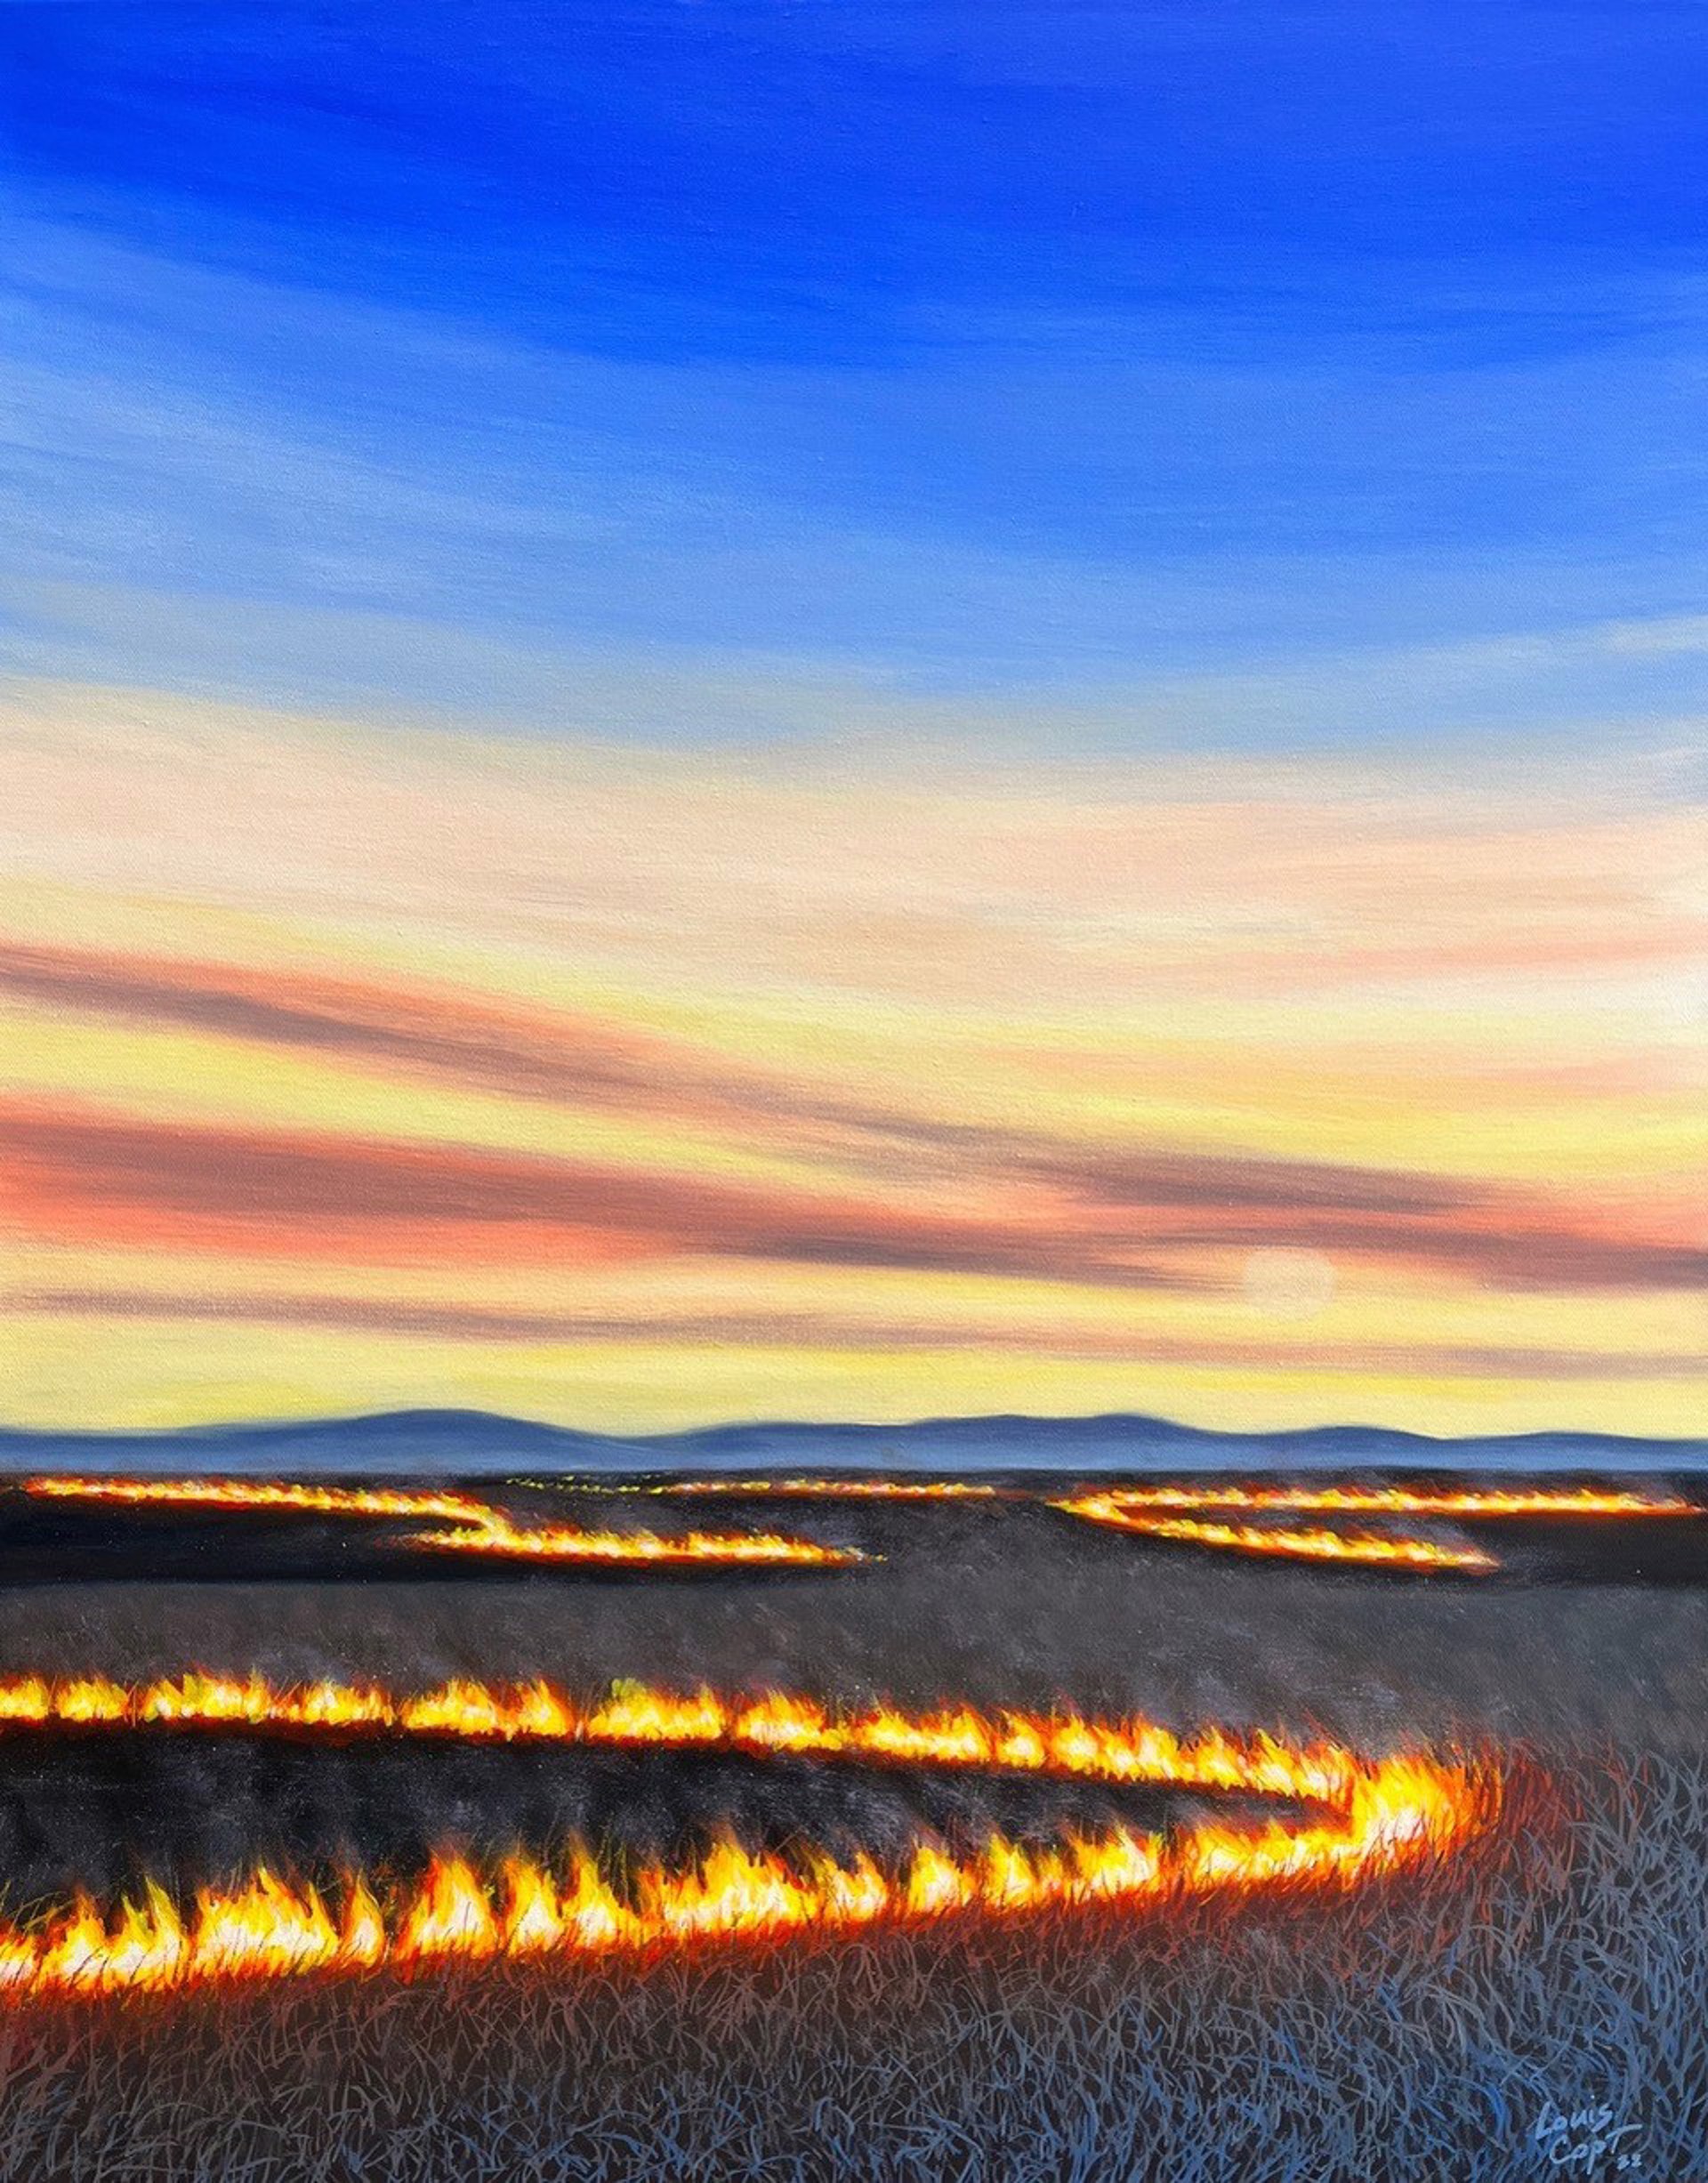 Rising Moon Over the Flames by Louis Copt